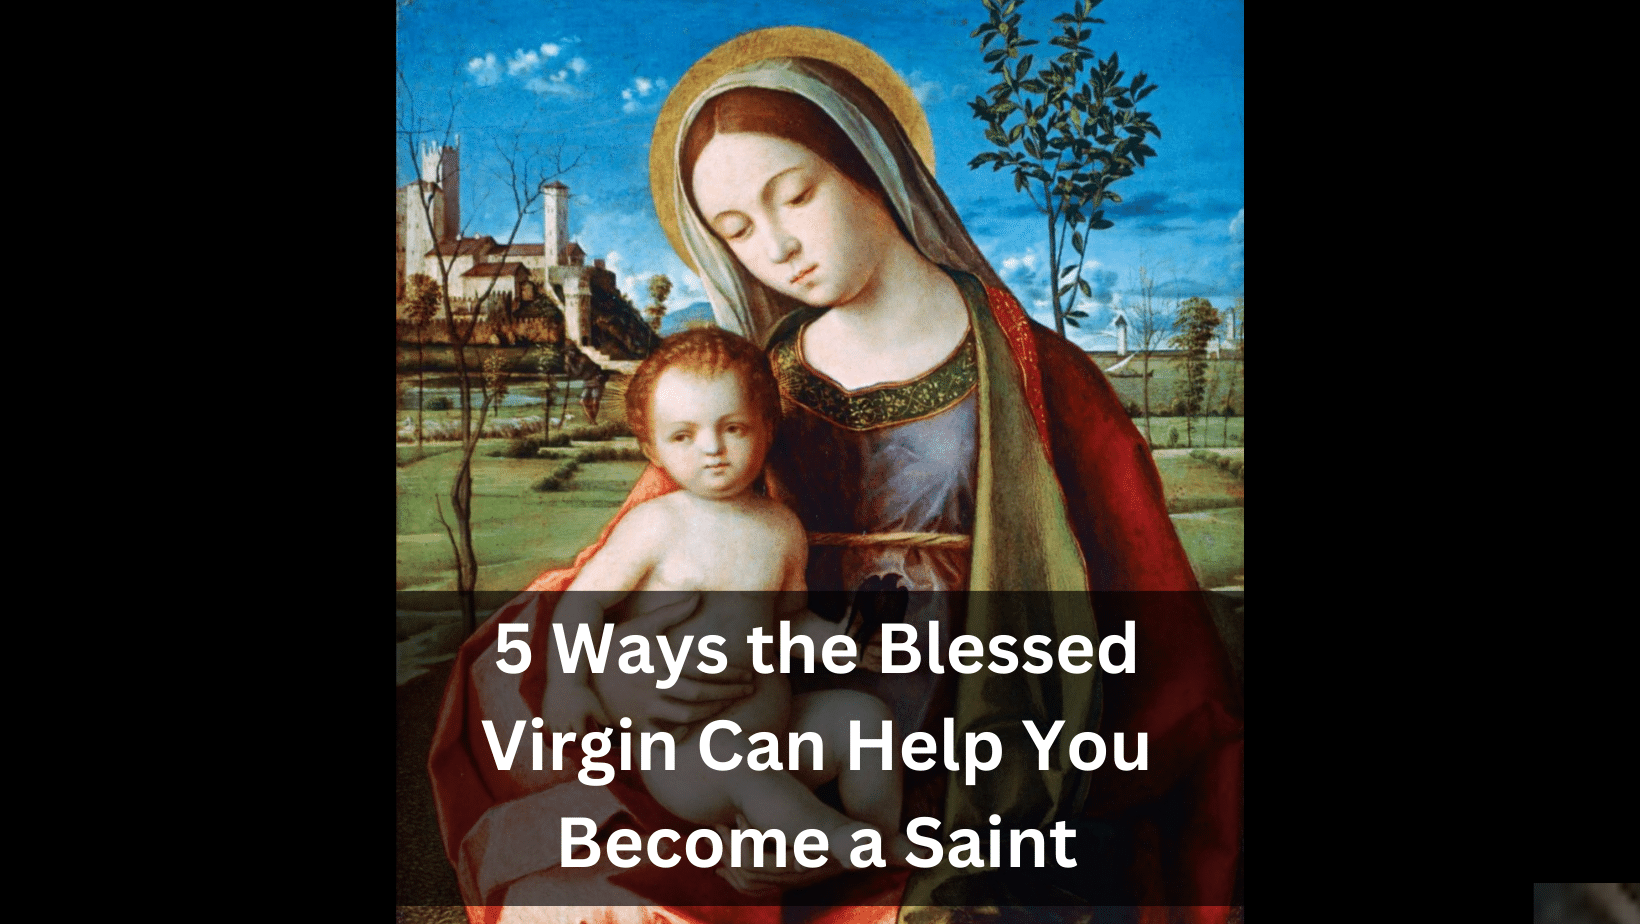 5 ways the blessed virgin can help you become a saint